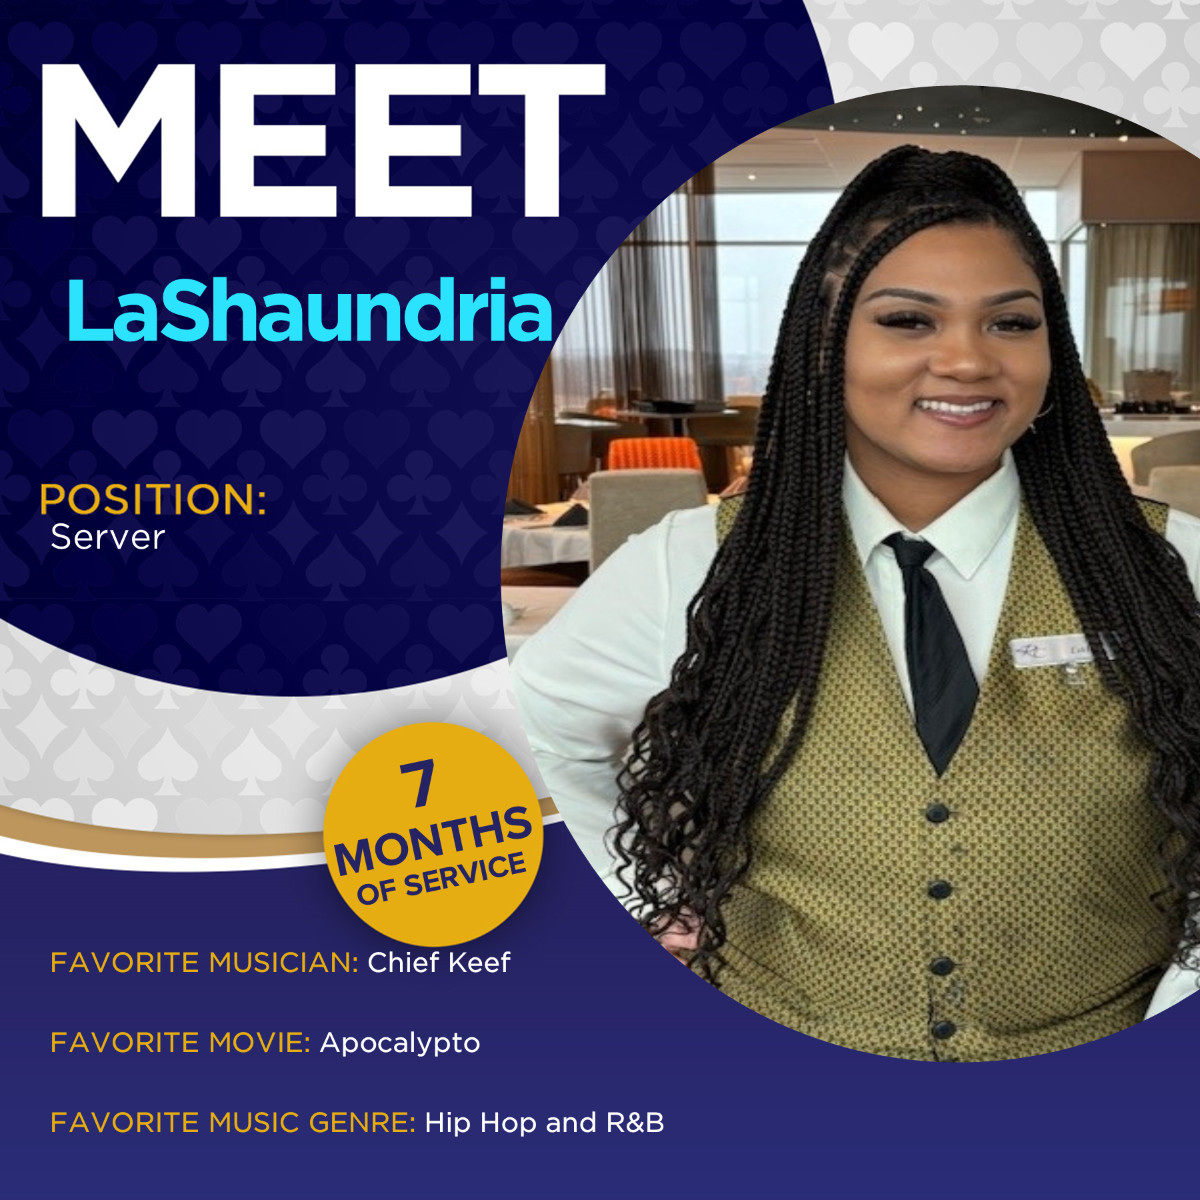 LaShaundria is one of our stellar Ruthie's servers! She loves the film Apocalypto and Chief Keef, and listens to Hip Hop and R&B.

Want to join our exceptional team like LaShaundria? Visit brnw.ch/21wKdsn

#rhythmcitycasino #quadcities #workelite #beelite